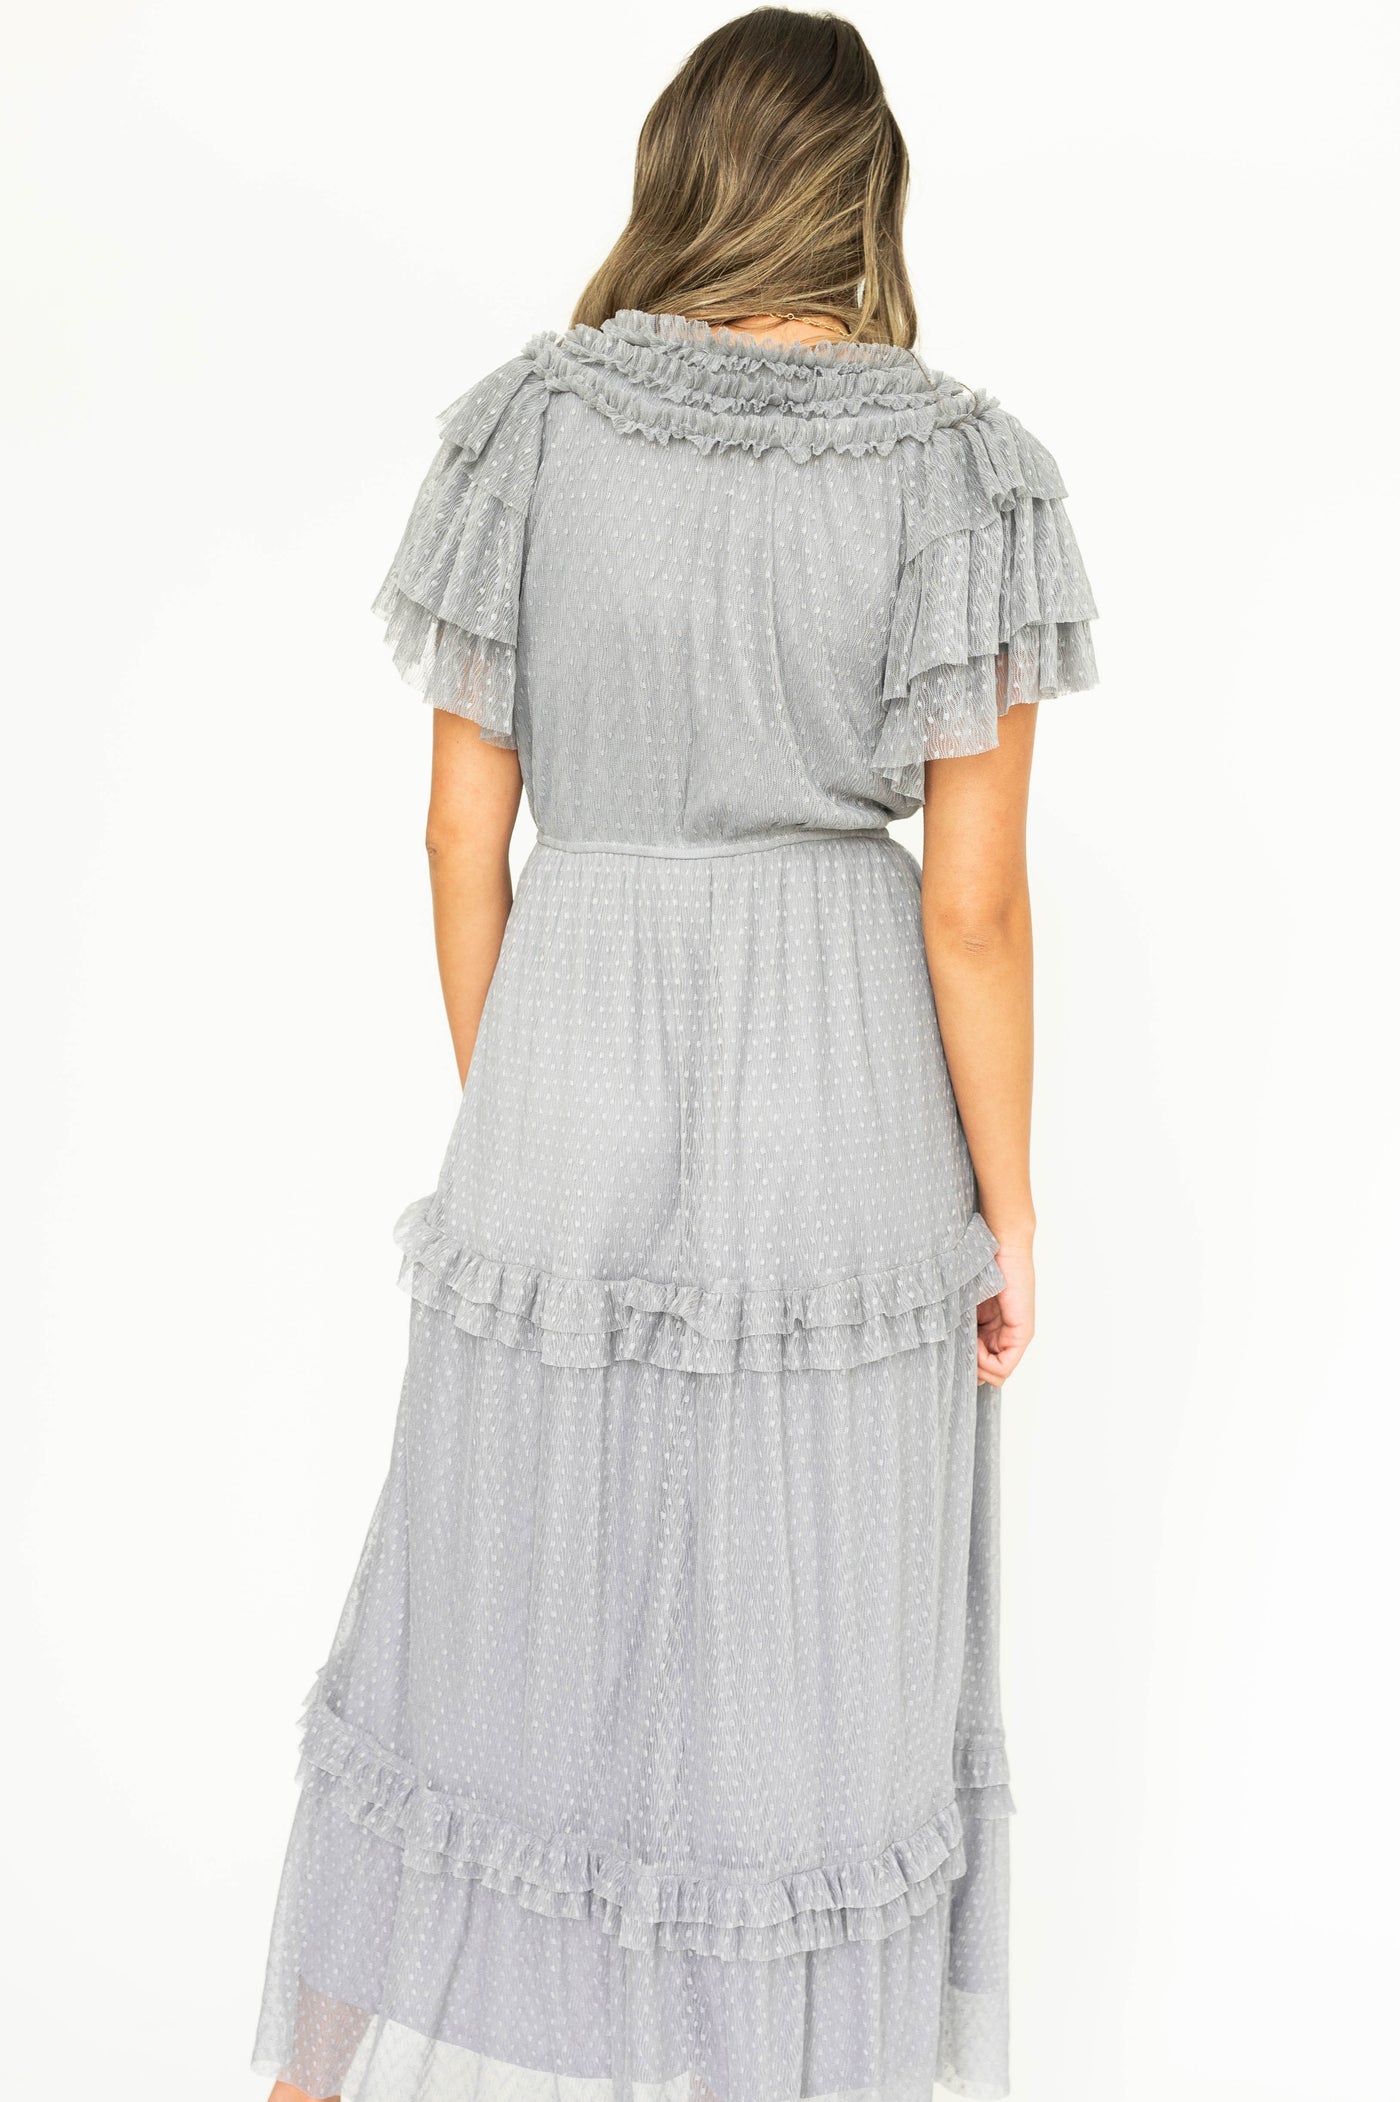 Back view of a blue gray lace short sleeve dress with ruffles on sleeves and neck.